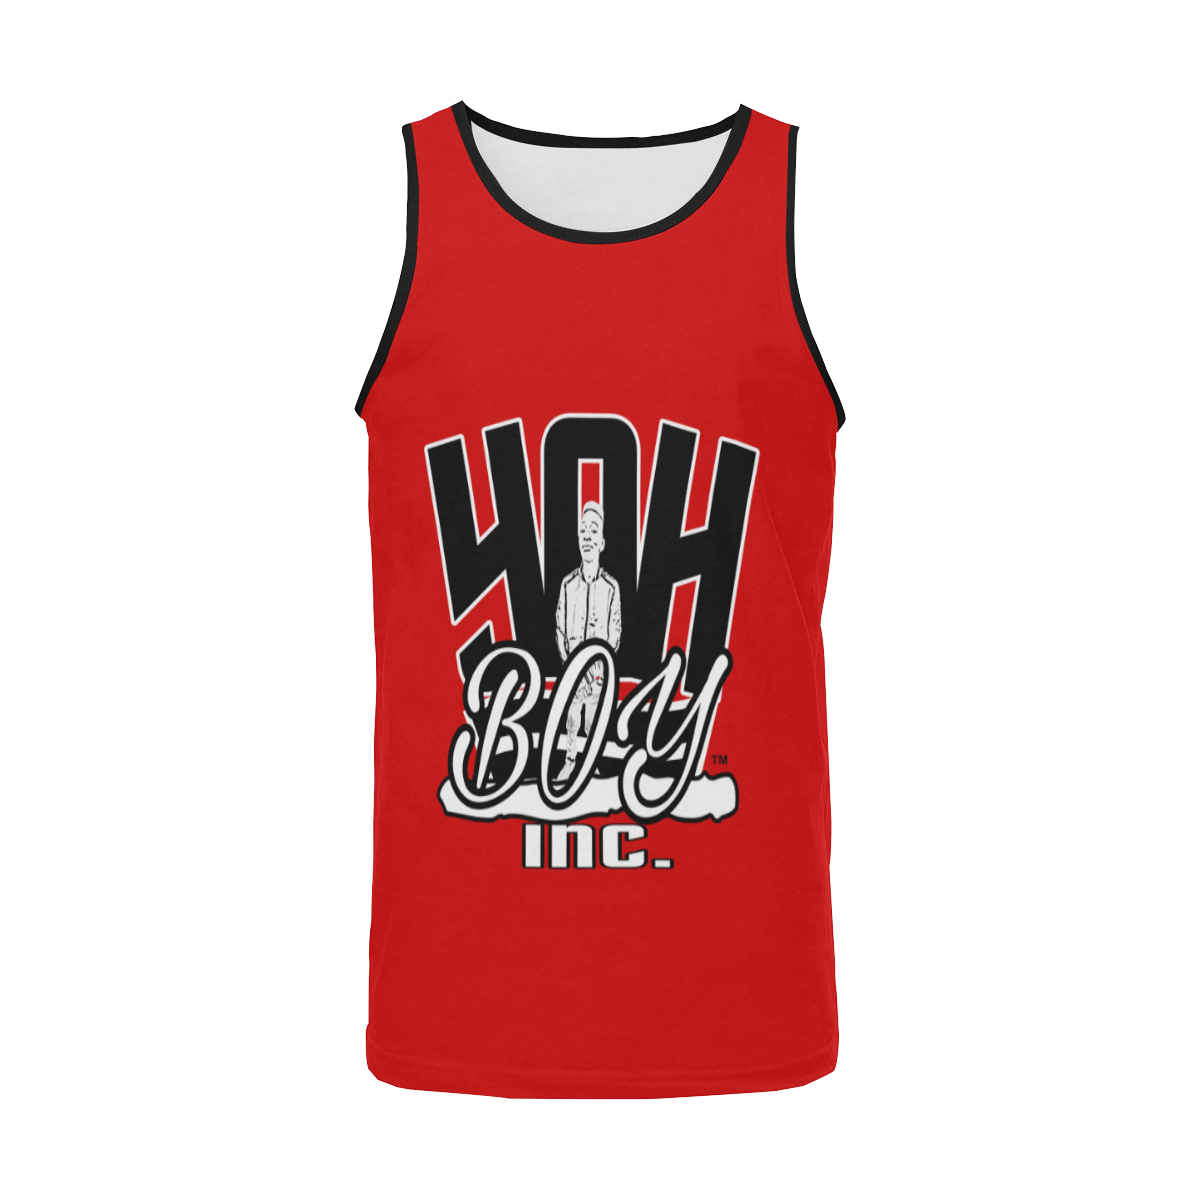 YahBoy Inc Red Men's All Over Print Tank Top (Model T57)